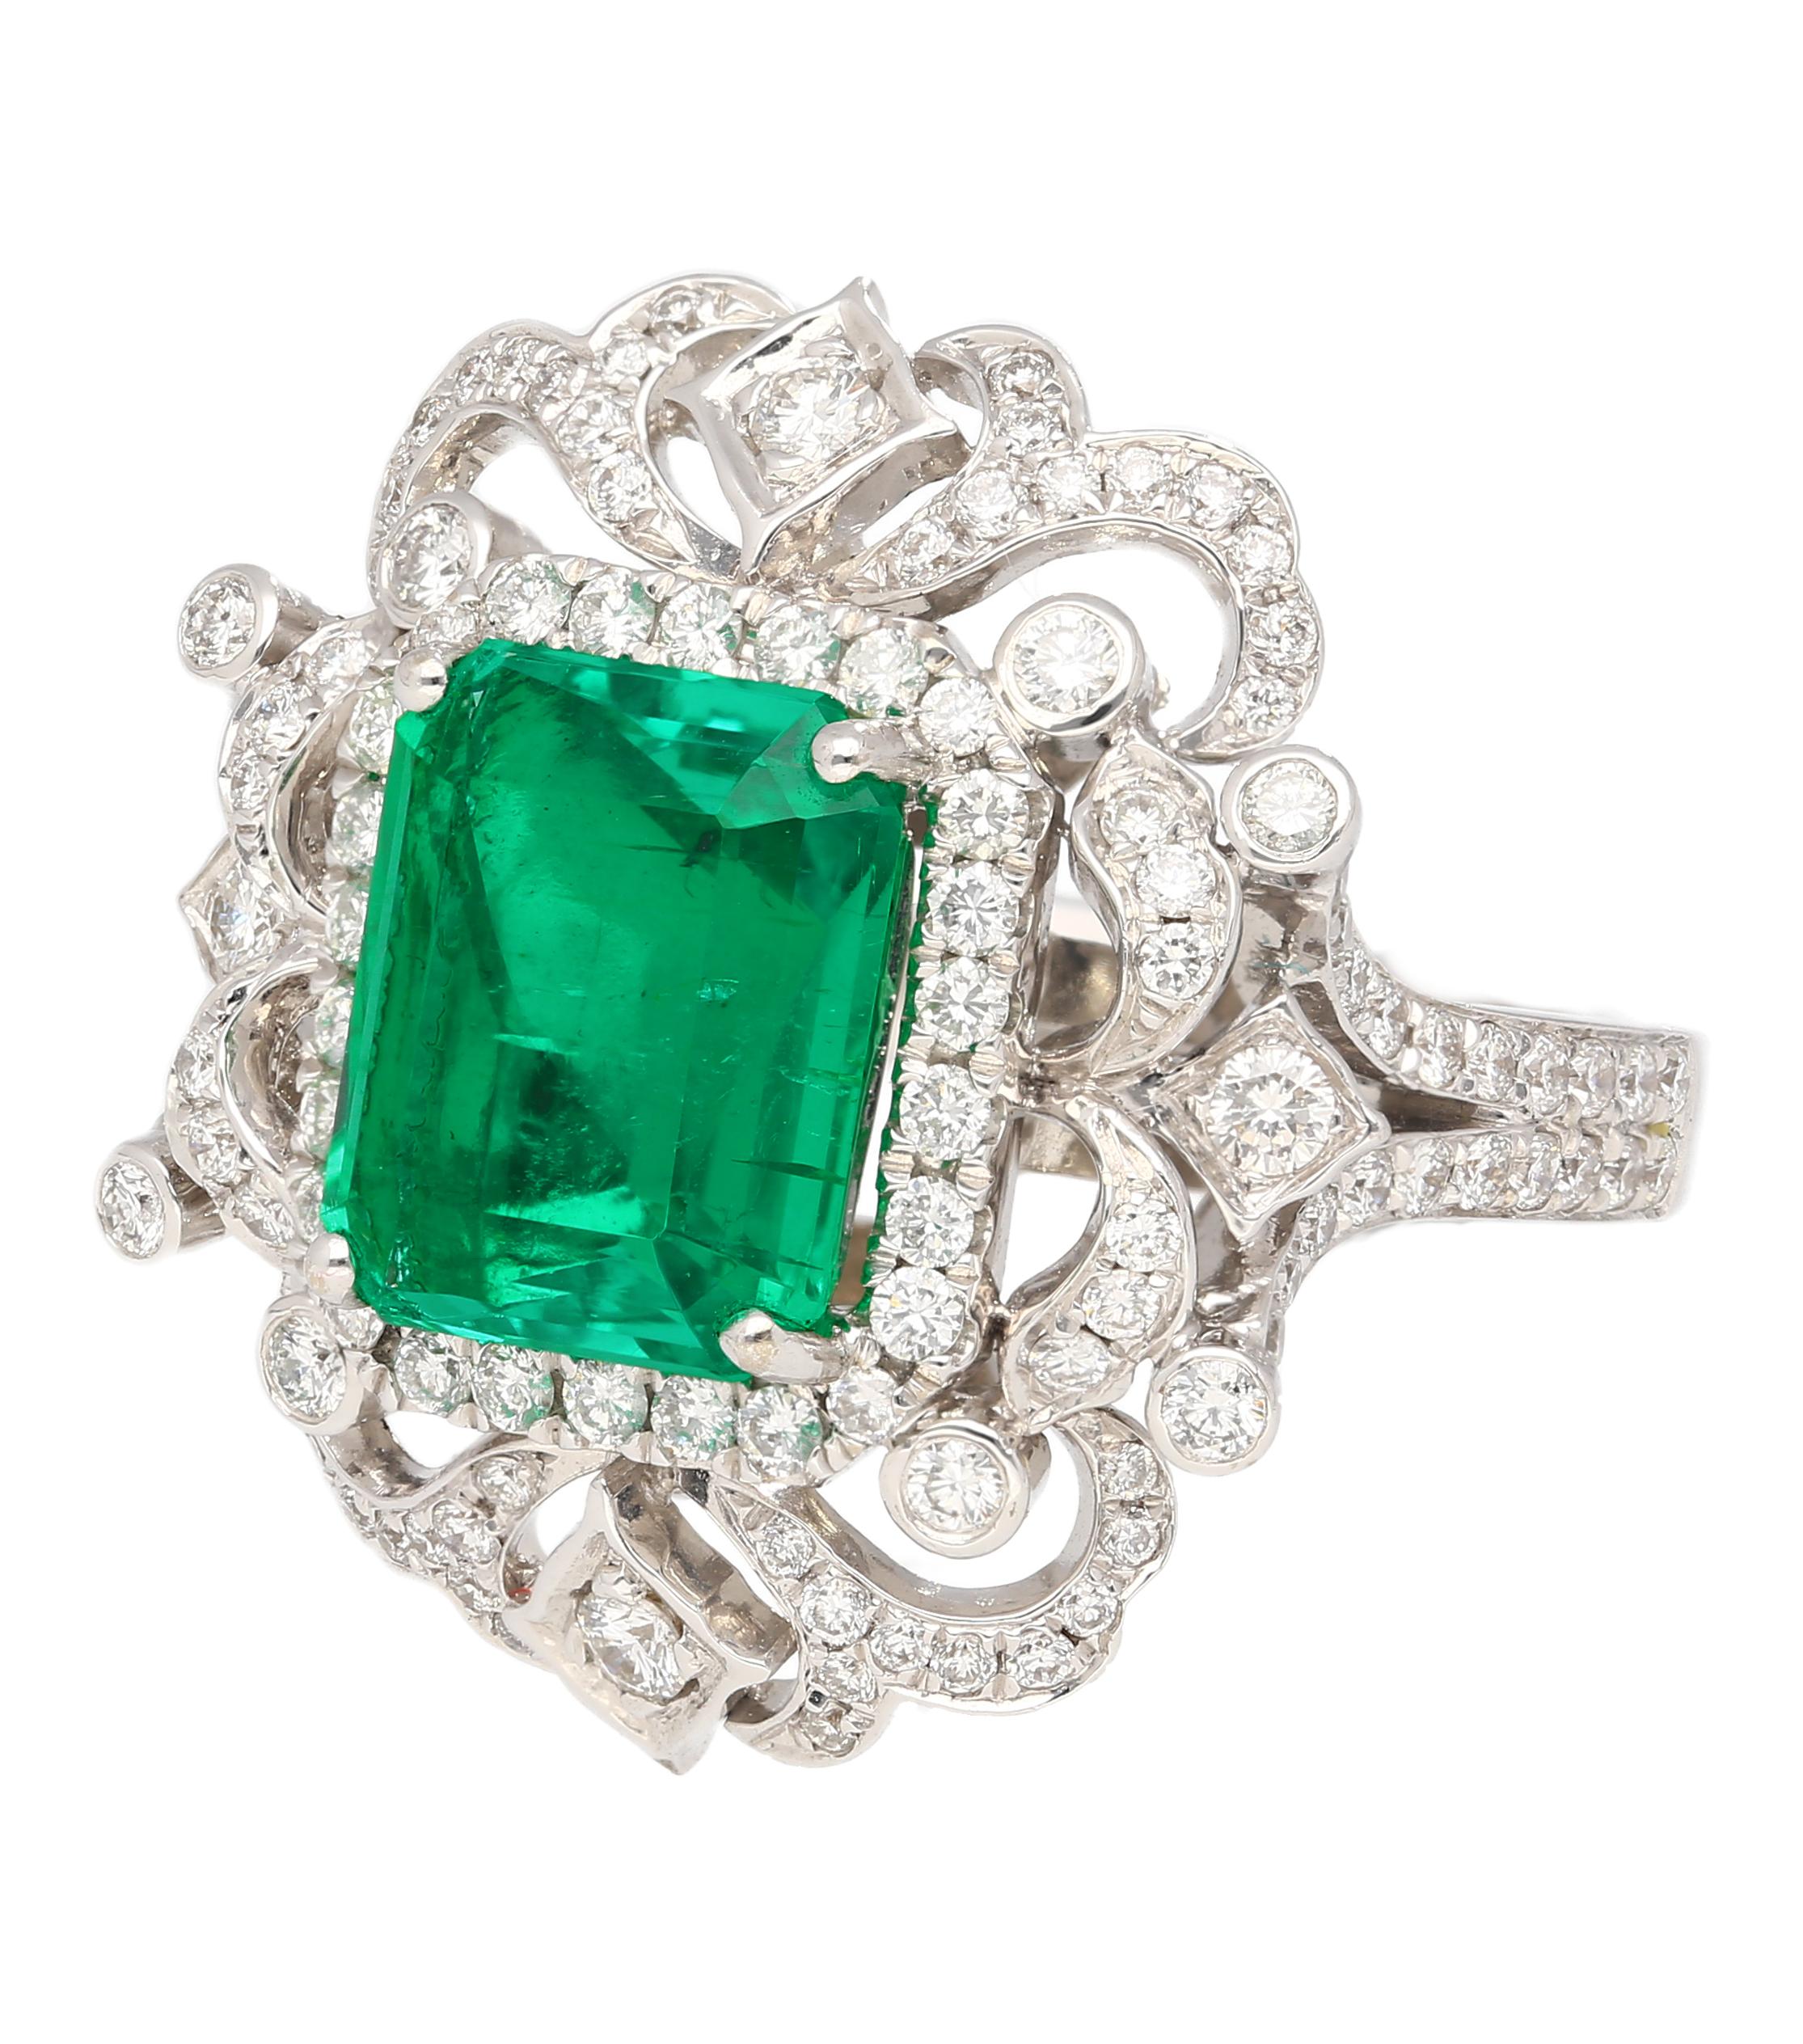 Emerald Cut GIA Certified 3.75 Carat Colombian Emerald in 18k White Gold Art Deco Ring For Sale